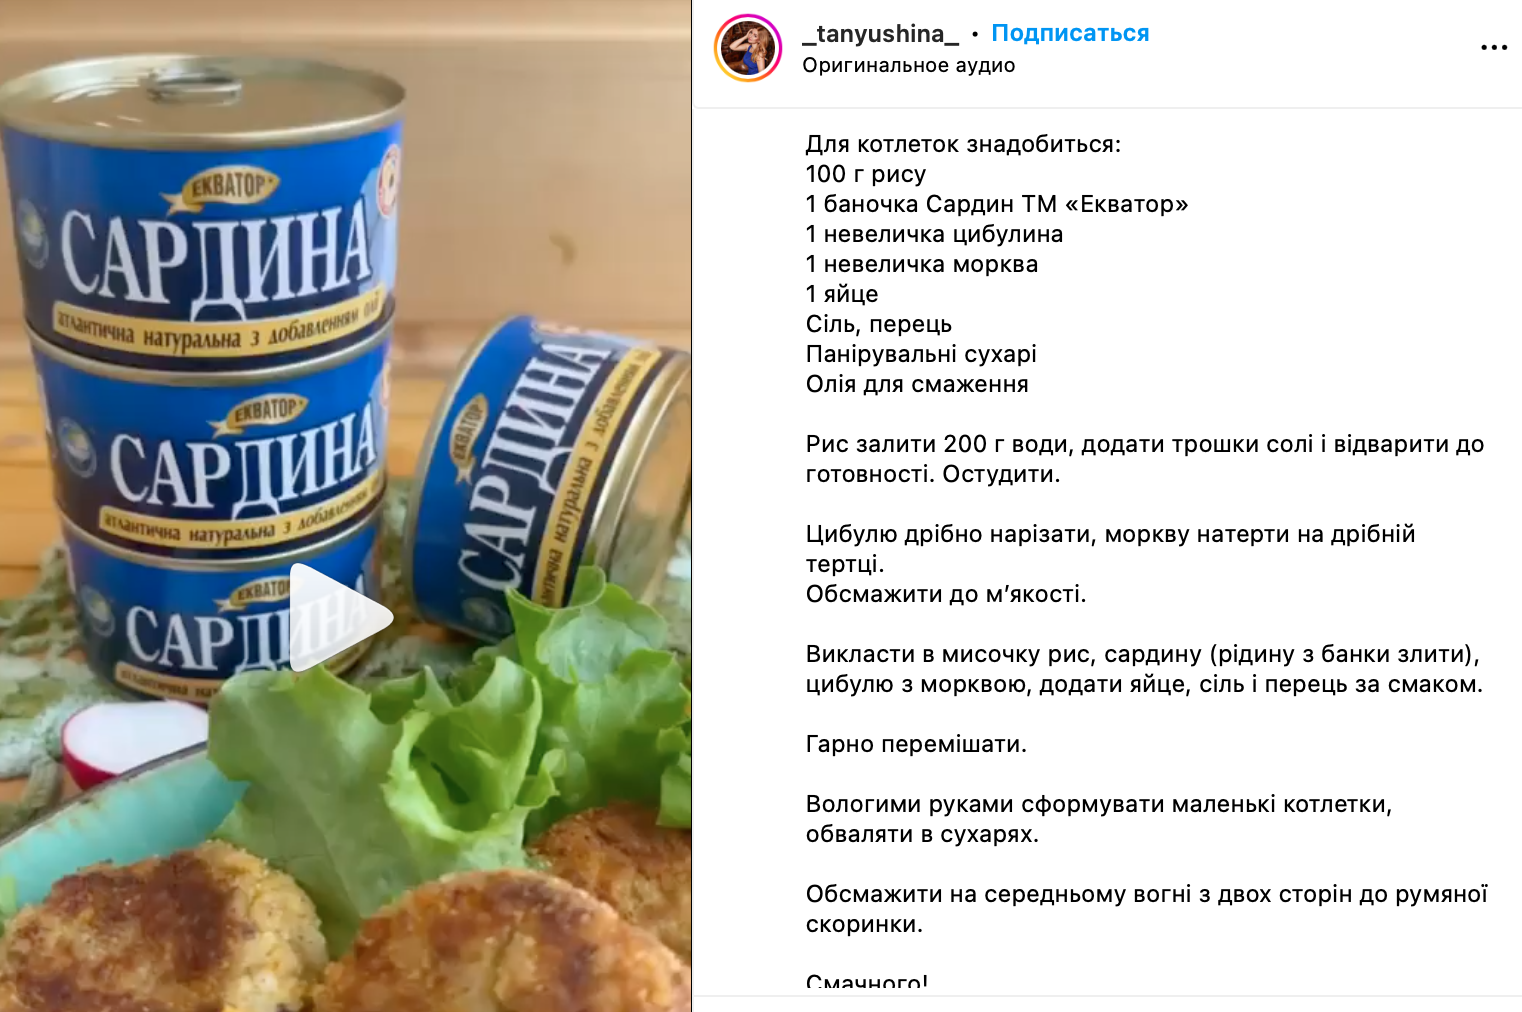 Recipe for cutlets